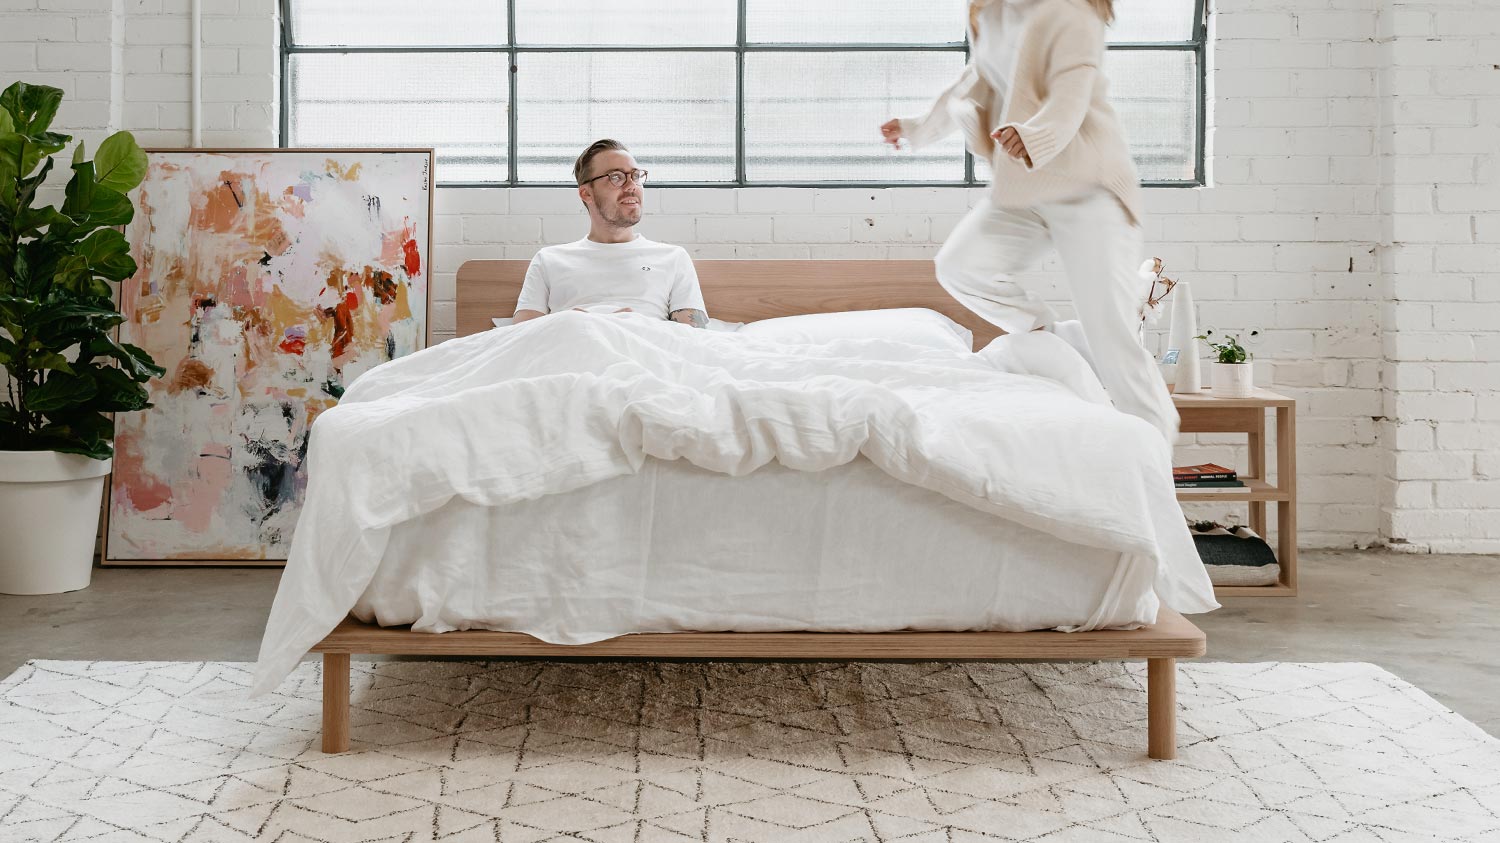 Young woman jumping on to mattress next to partner